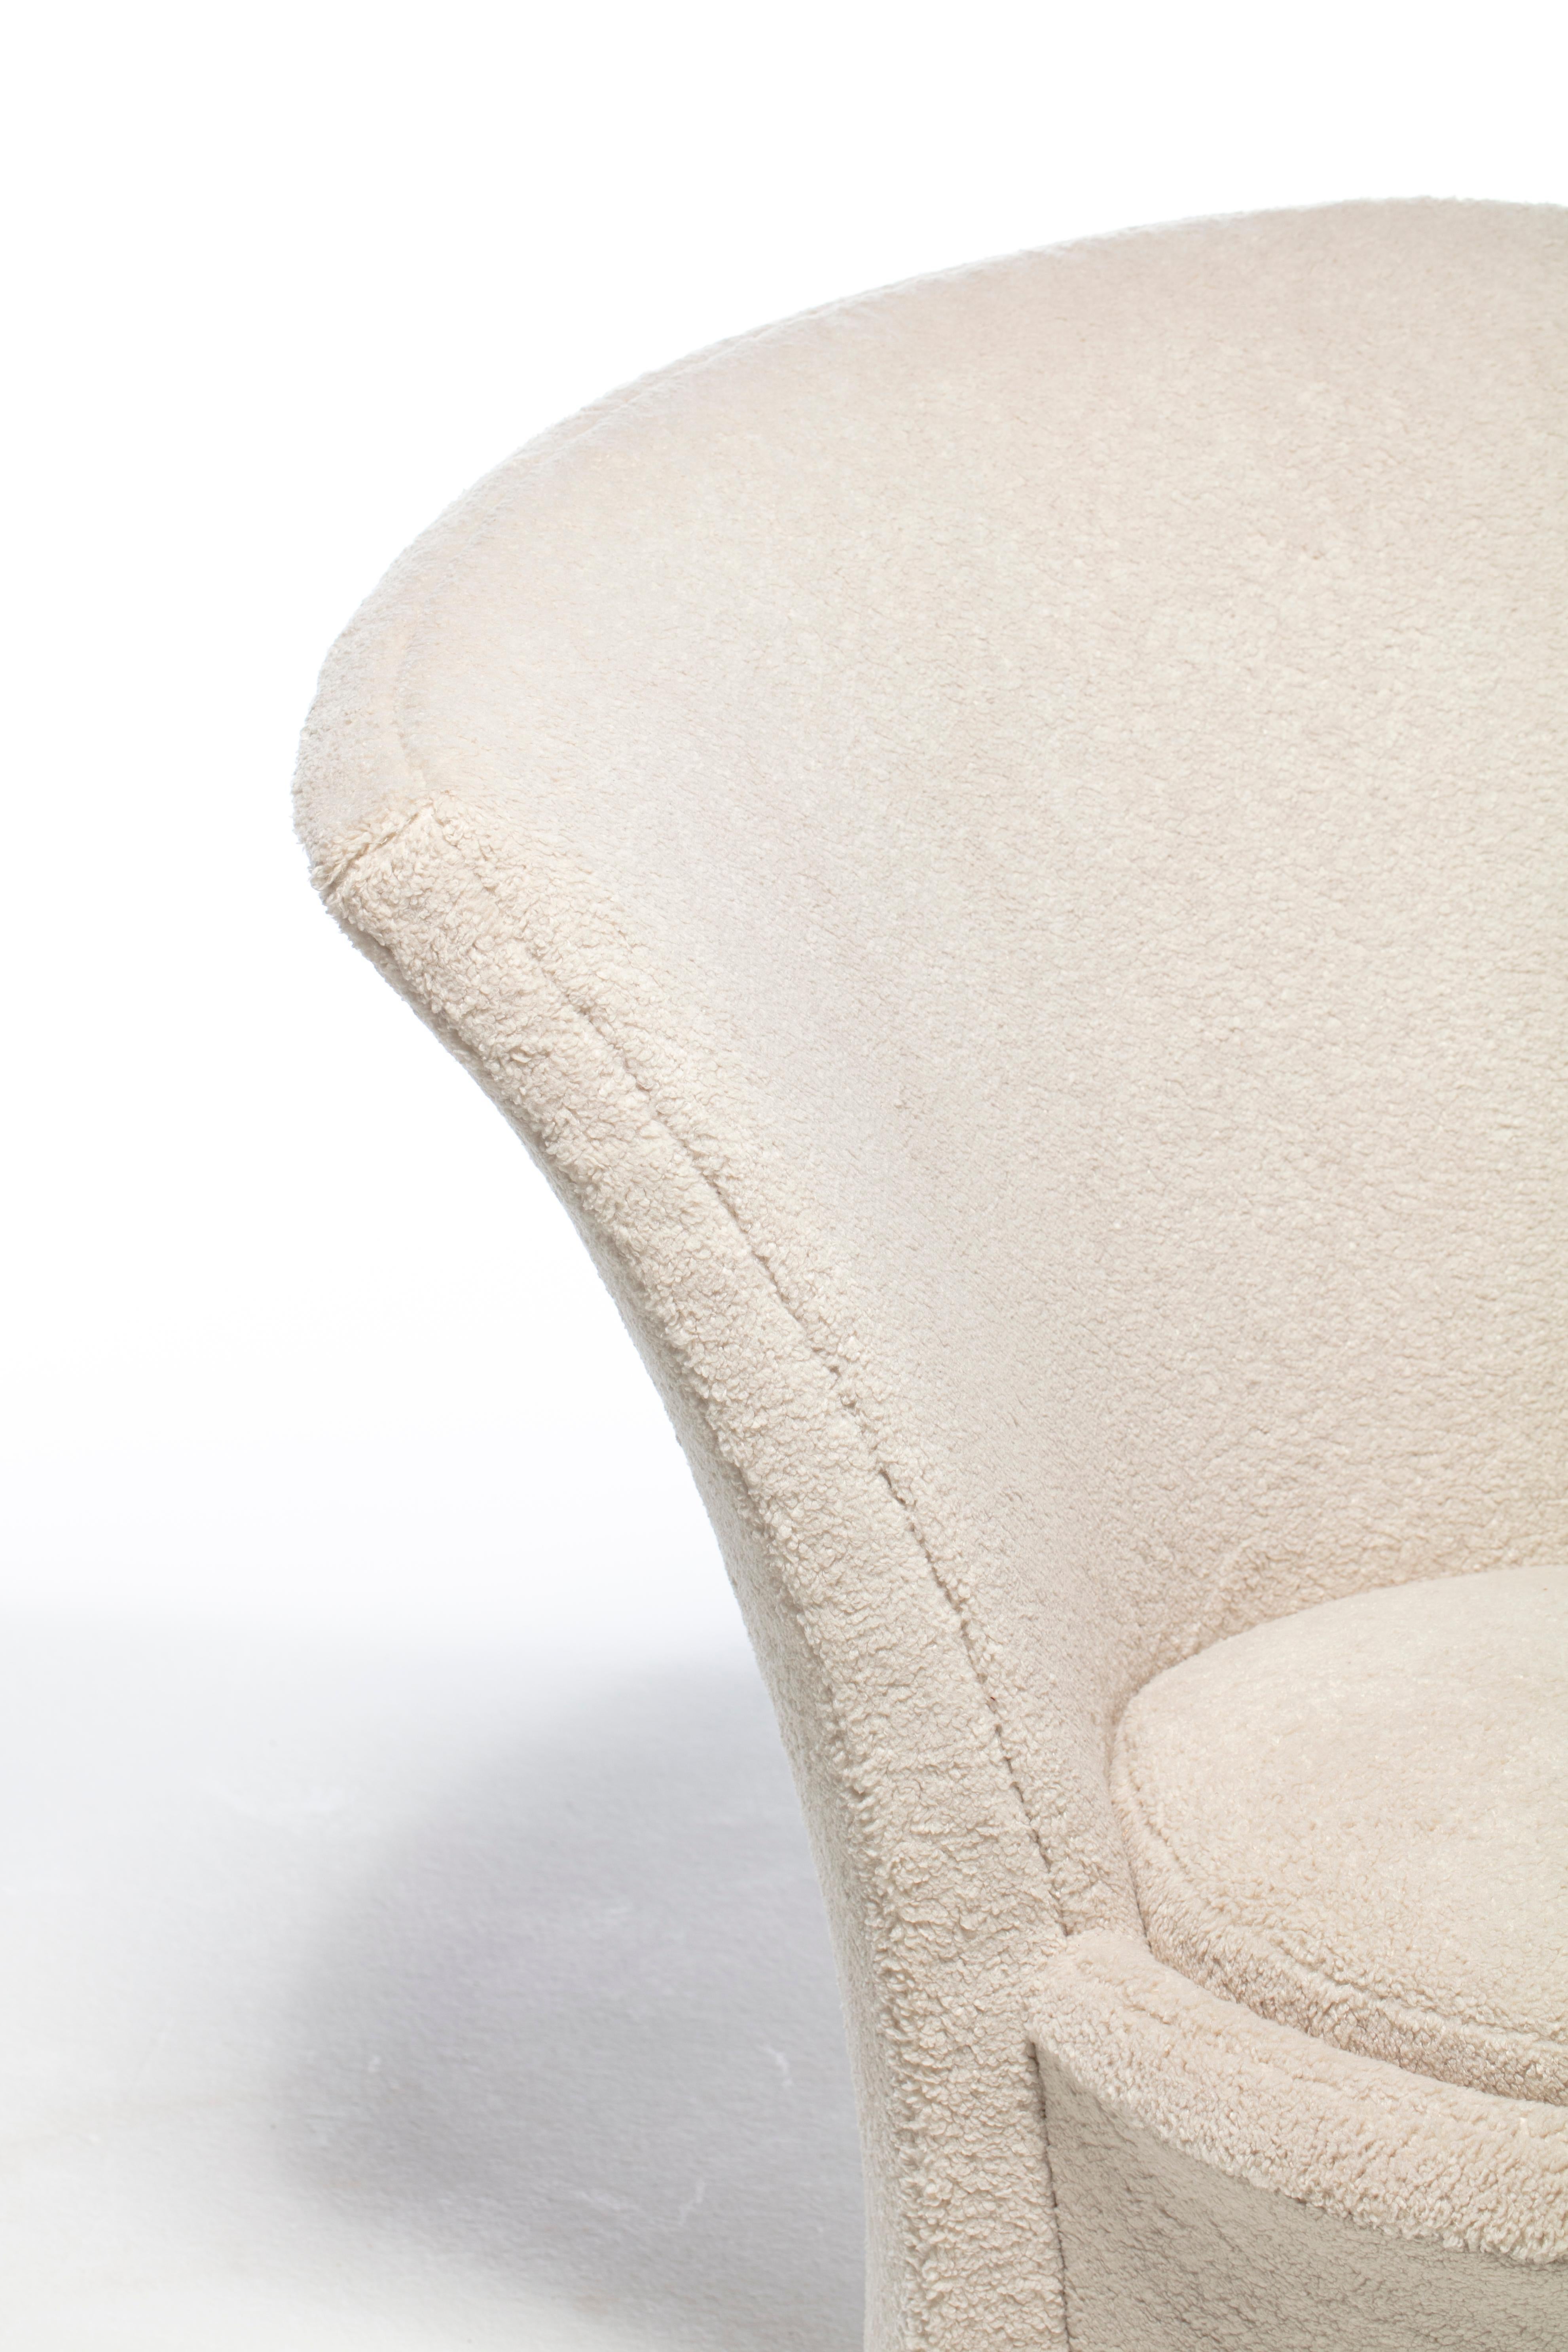 Vladimir Kagan Sculptural High Back Swivel Chairs in Textured Ivory Fabric For Sale 9